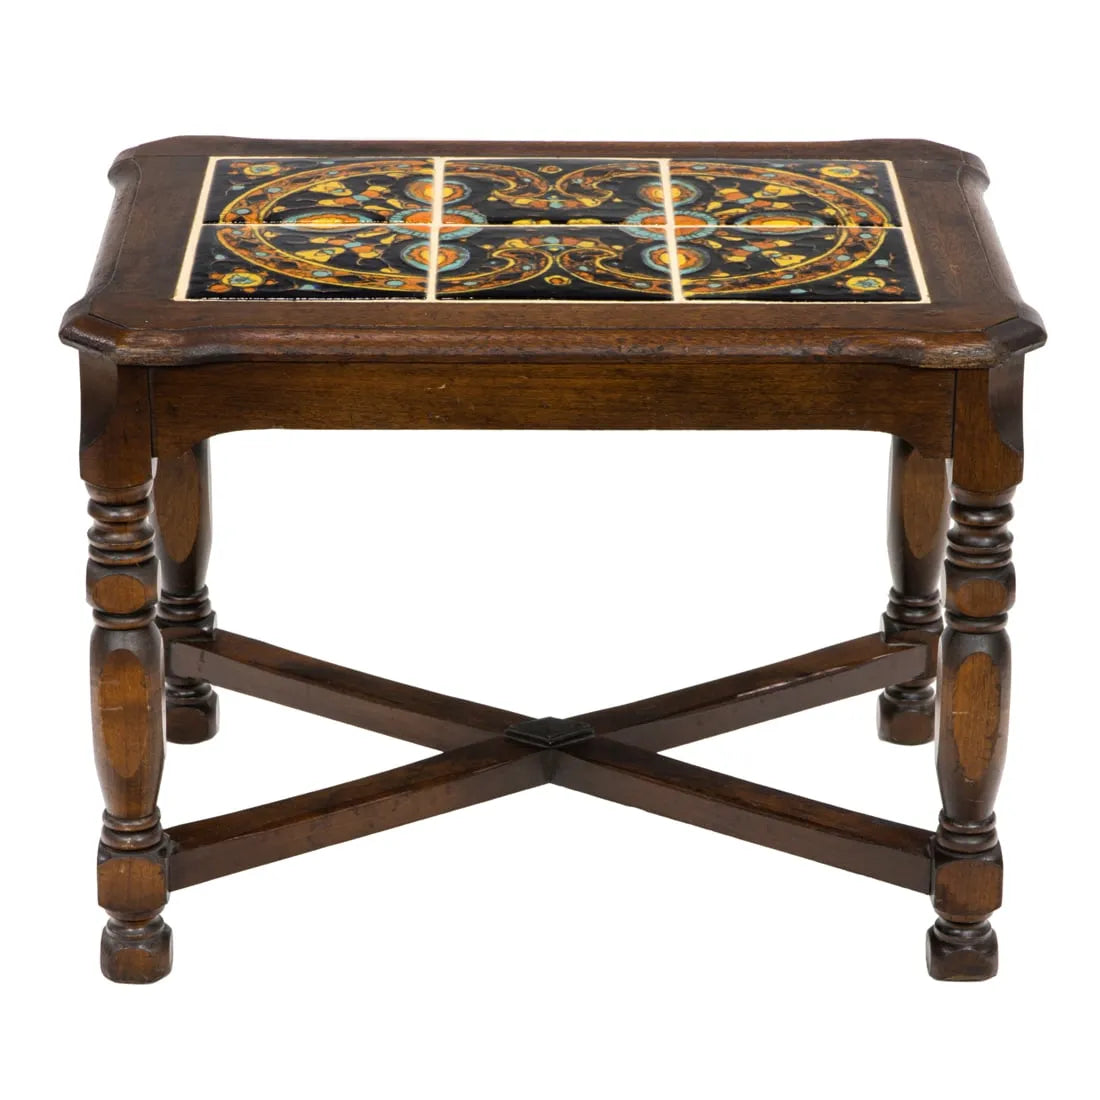 AF1-287: Antique Early 20th Century Mahogany Spanish Colonial Revival Tile Top Low Table W/ Taylor Tiles